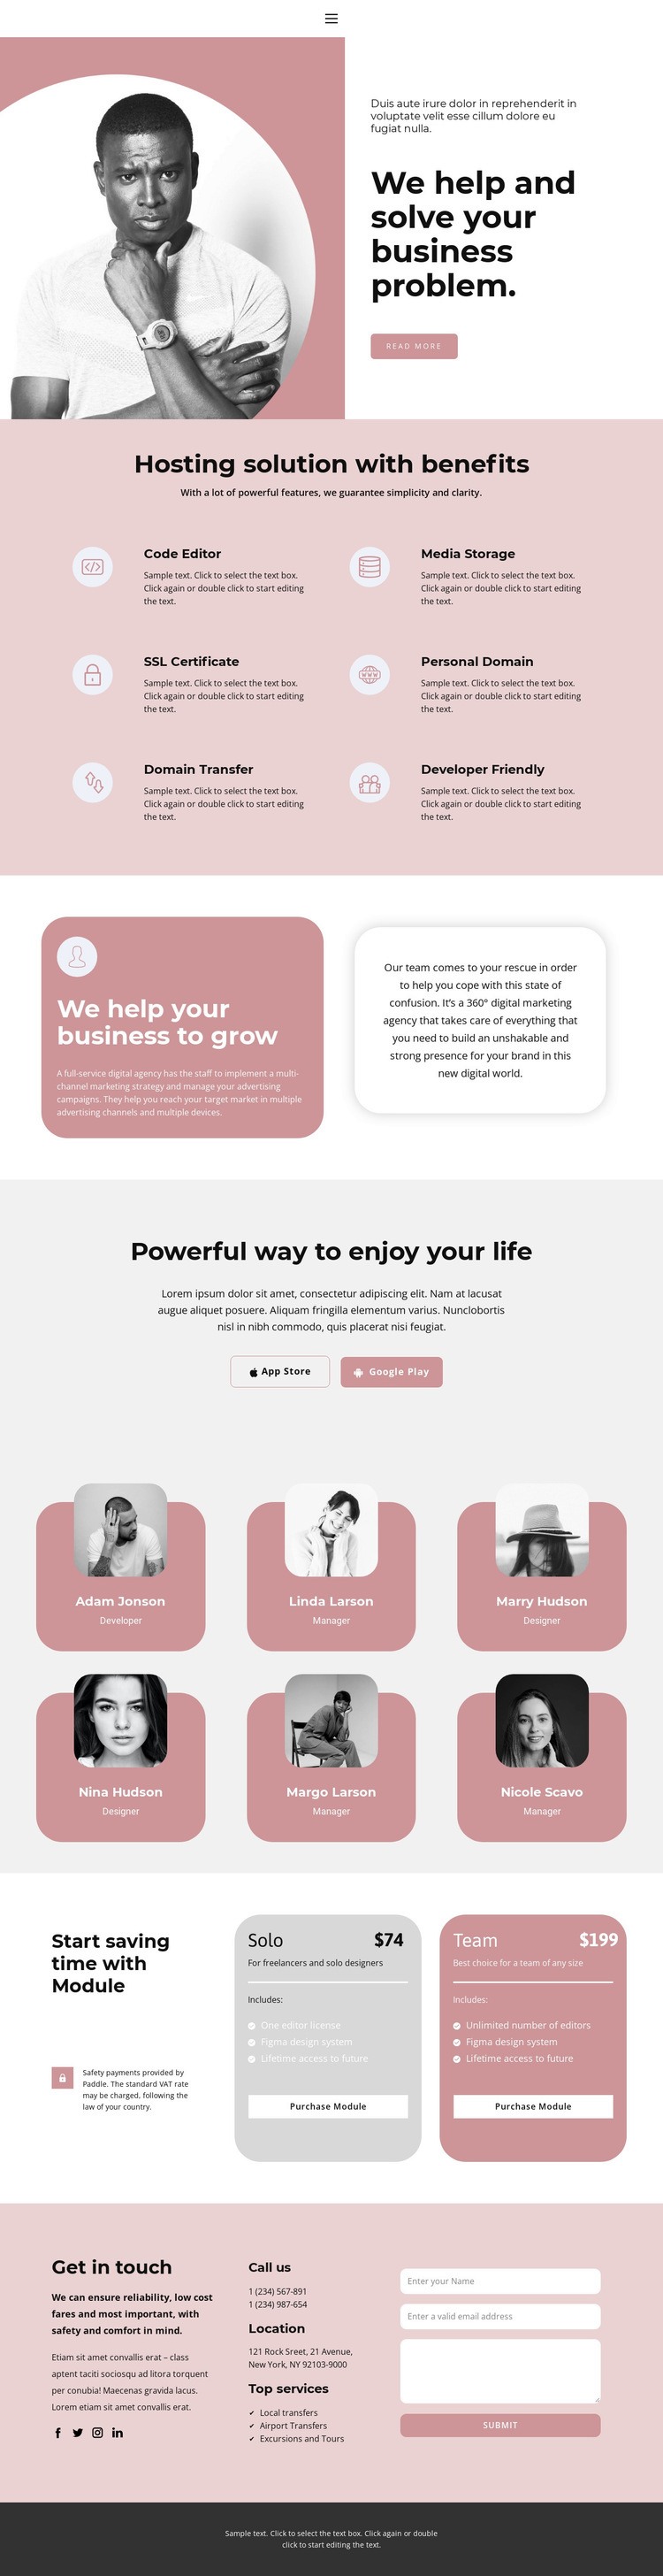 Problem solving is our choice Wix Template Alternative